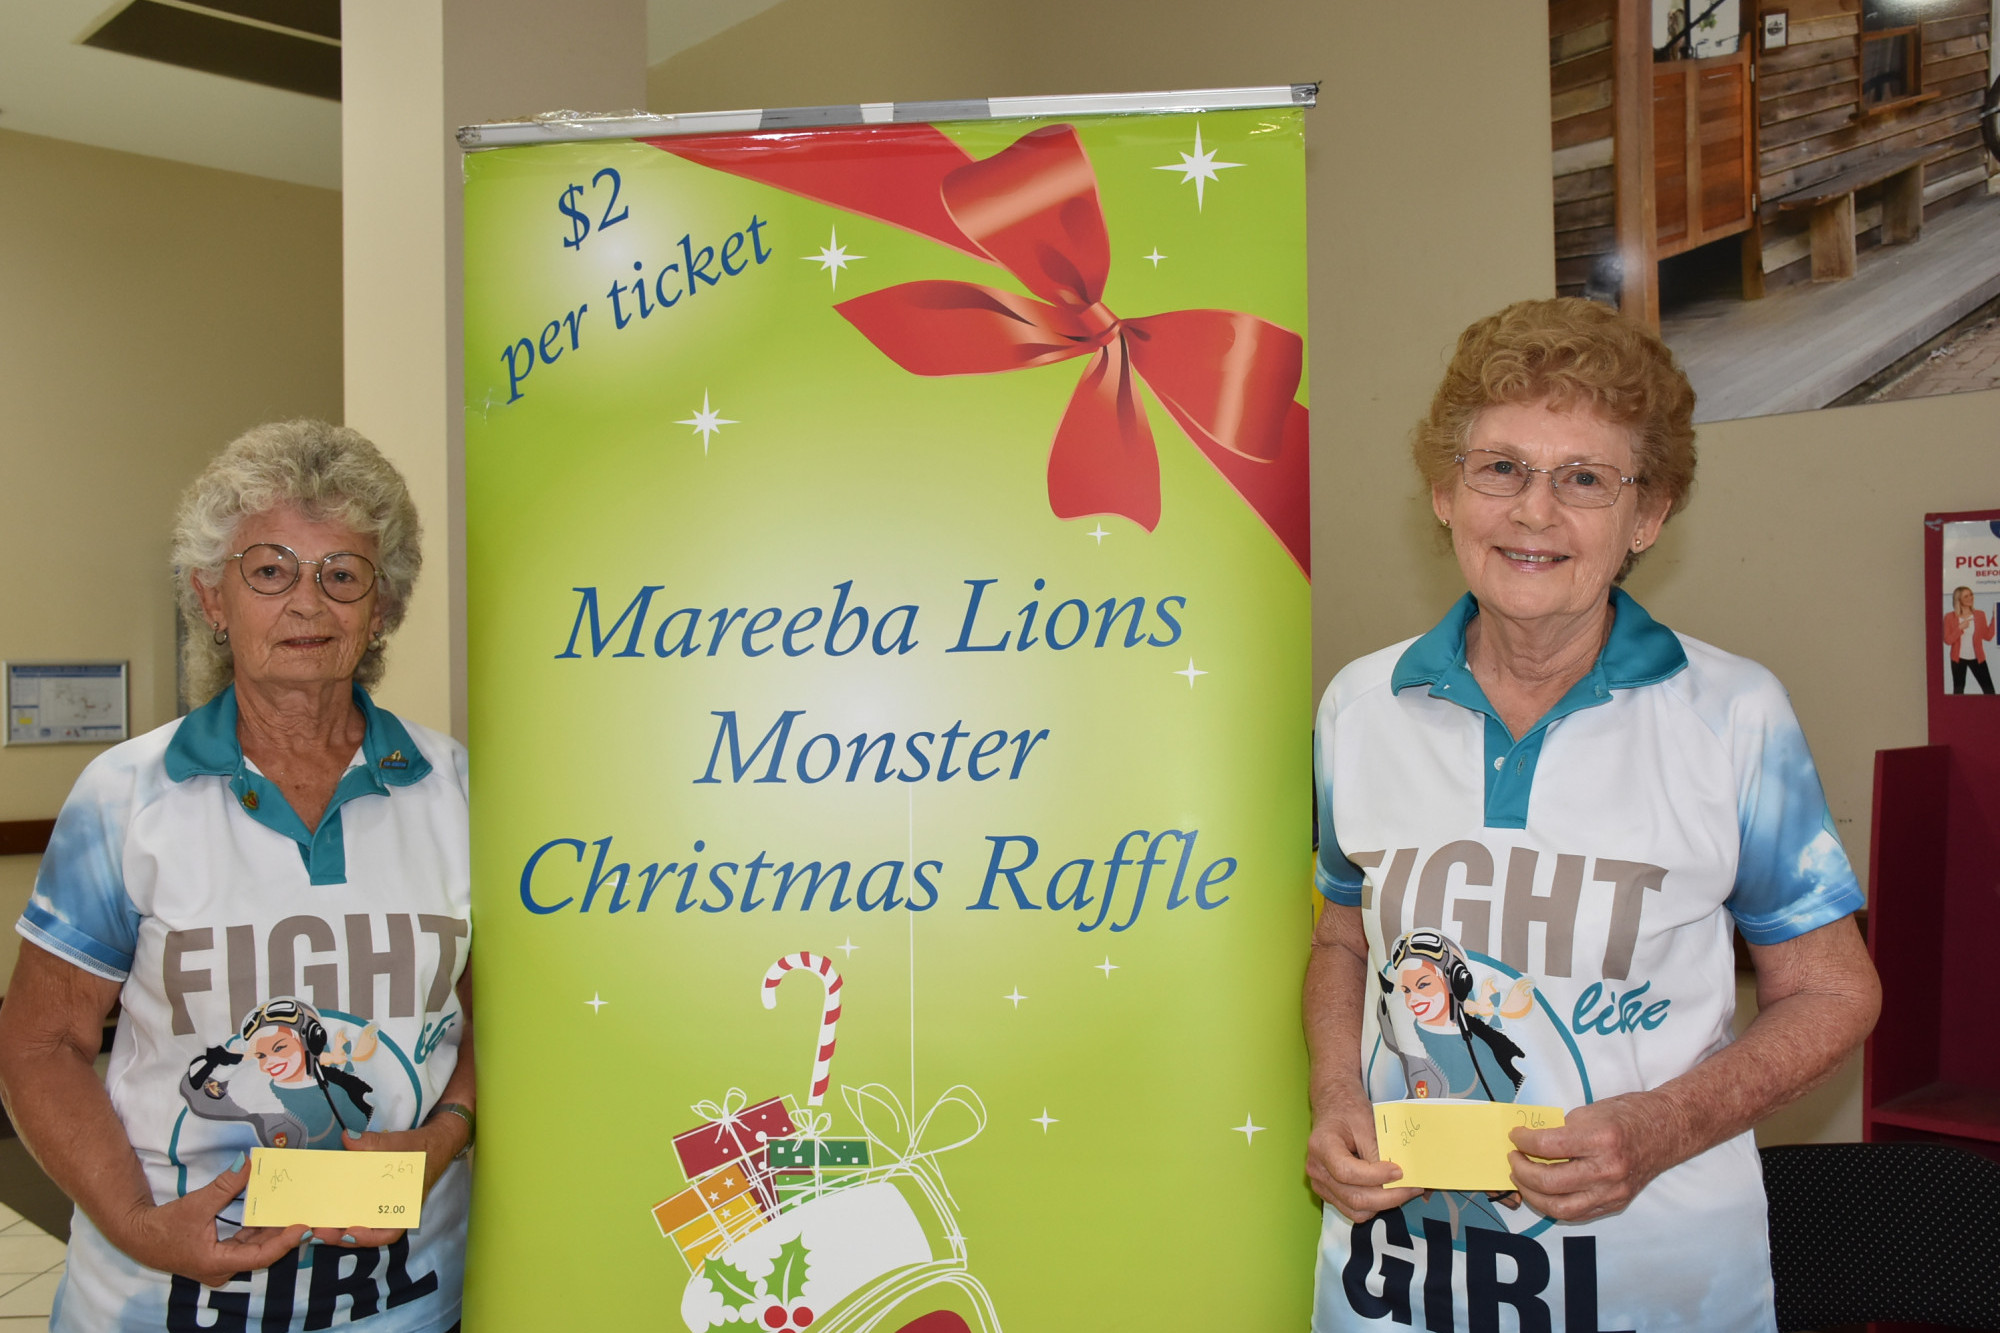 Mareeba Lions volunteers Rena Braes and Eve-Lyn McGrath have been selling tickets for the Mareeba Lions Christmas Raffle since it started in October